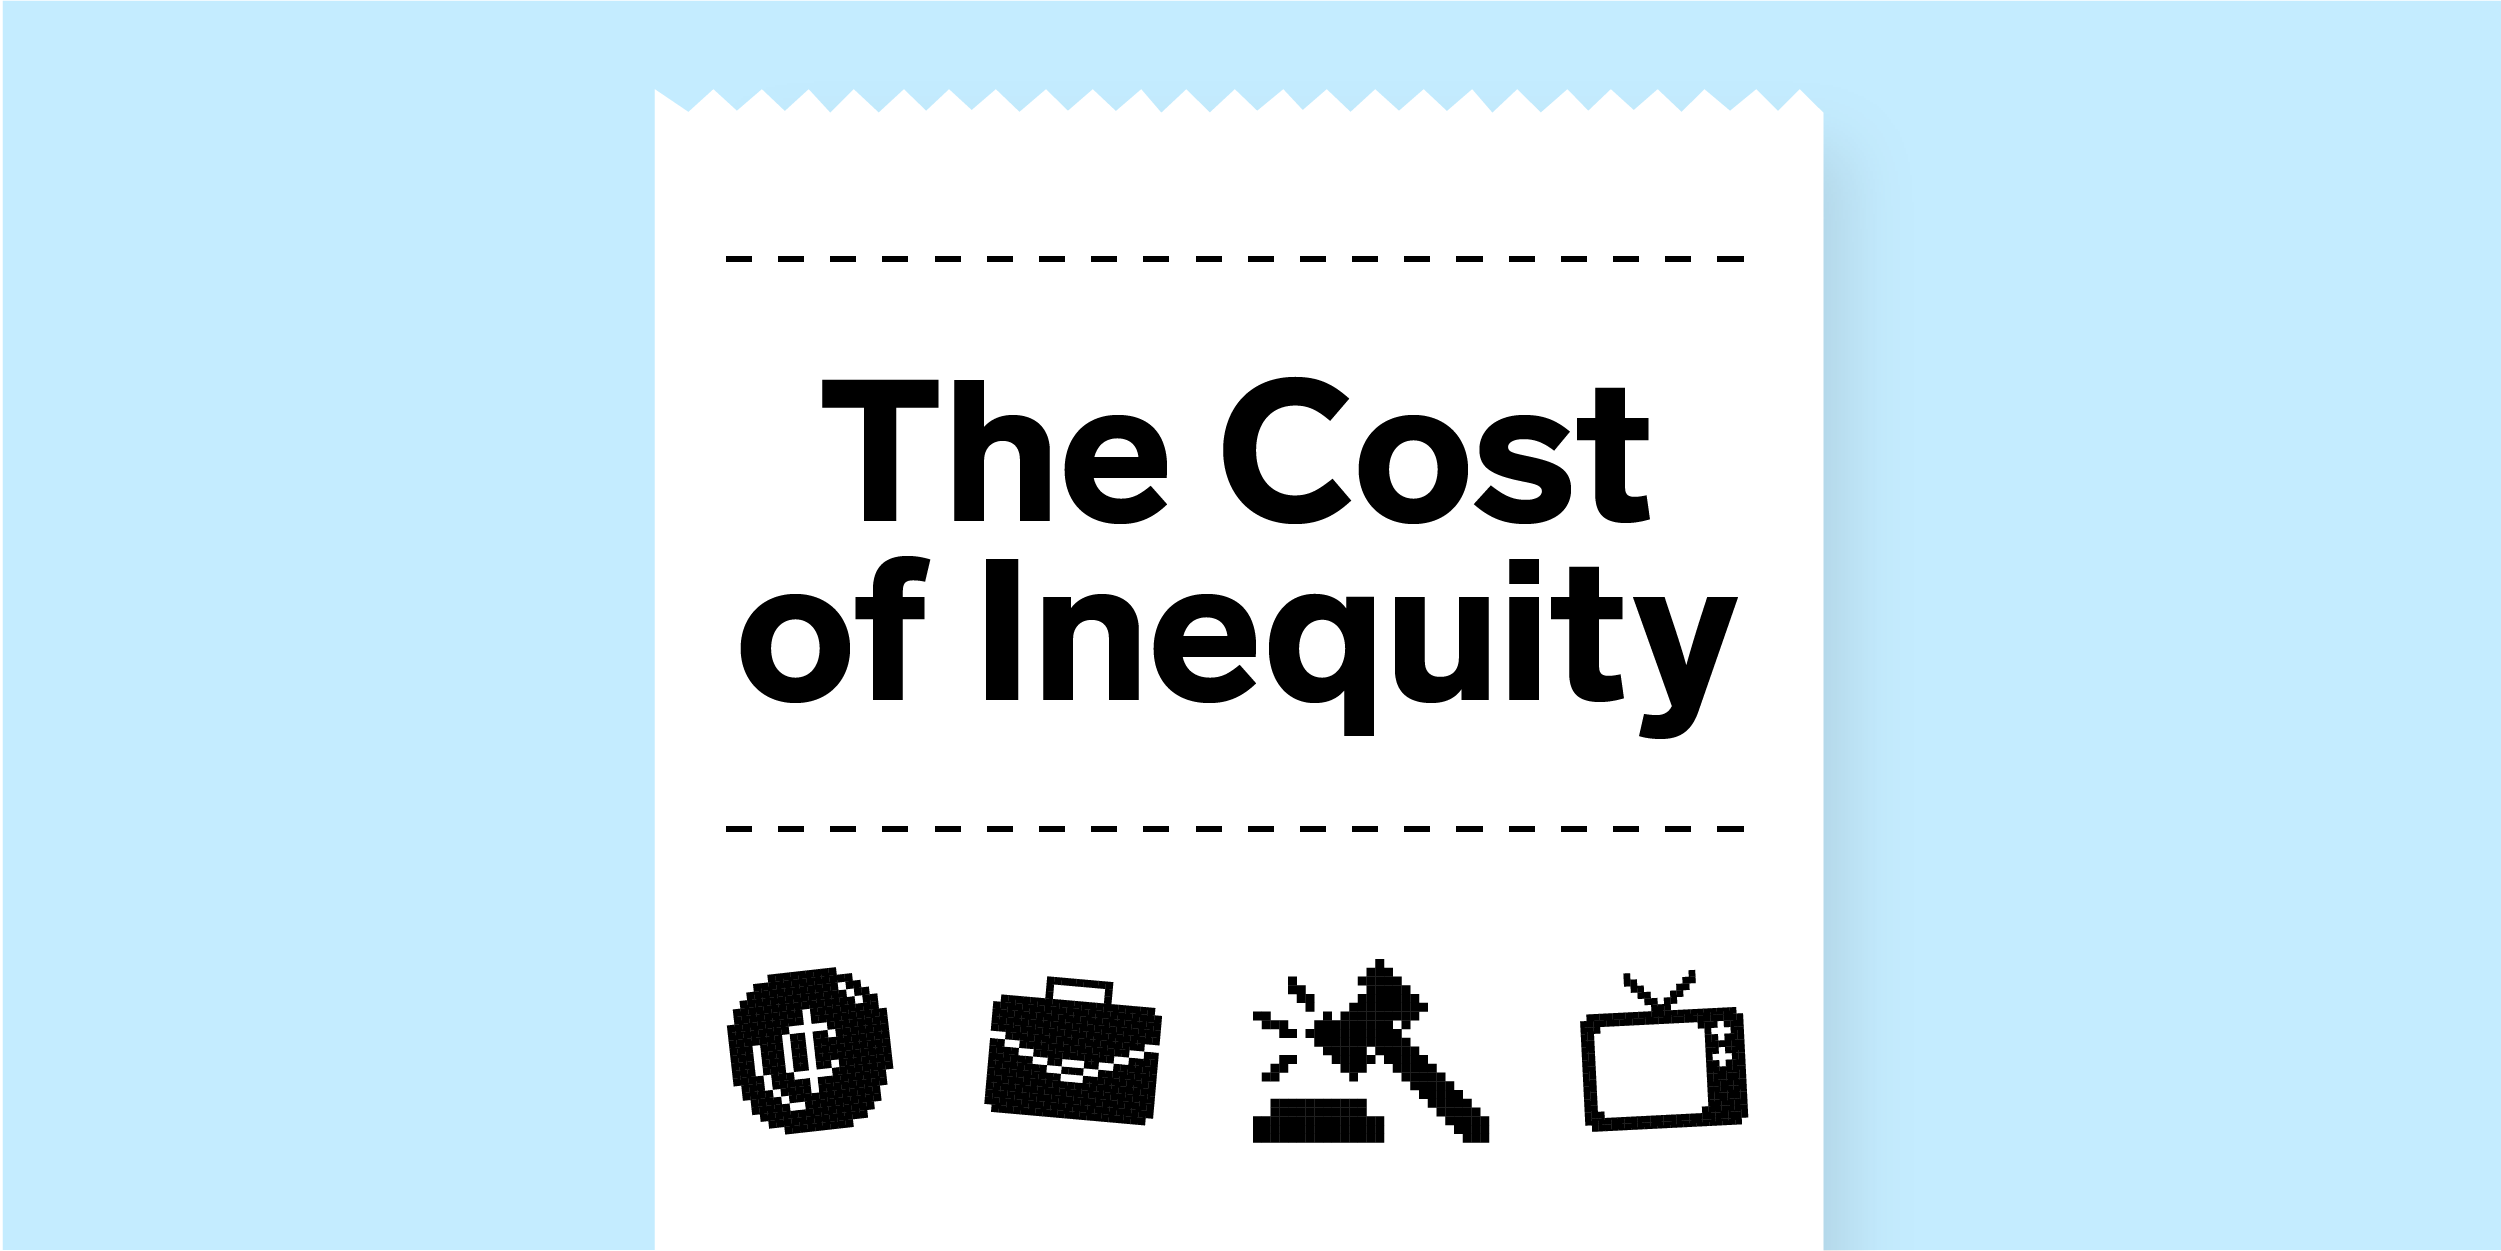 A receipt with the words "The Cost of Inequity" written on it on on a blue background.